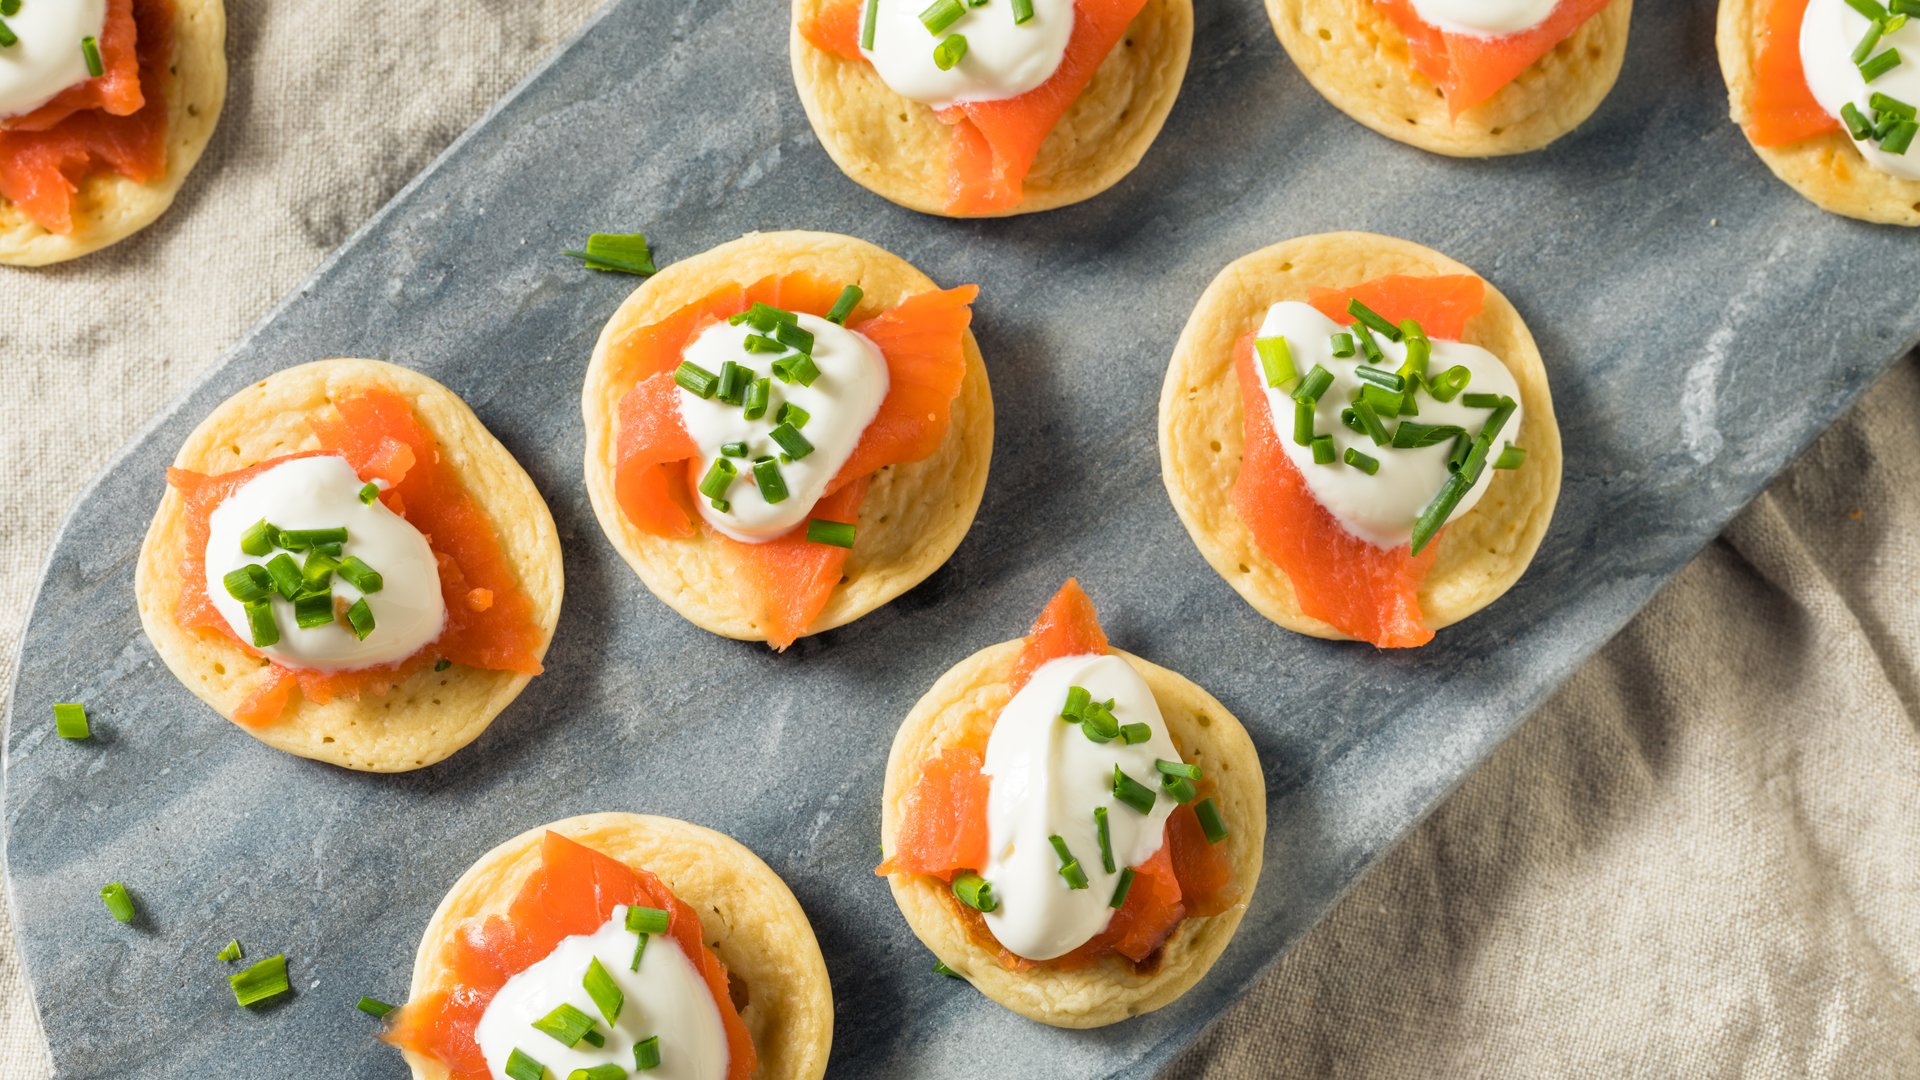 Delicious morsels: these smoked salmon gluten-free blinis are sure to impress. Add salmon roe if you’re feeling indulgent.